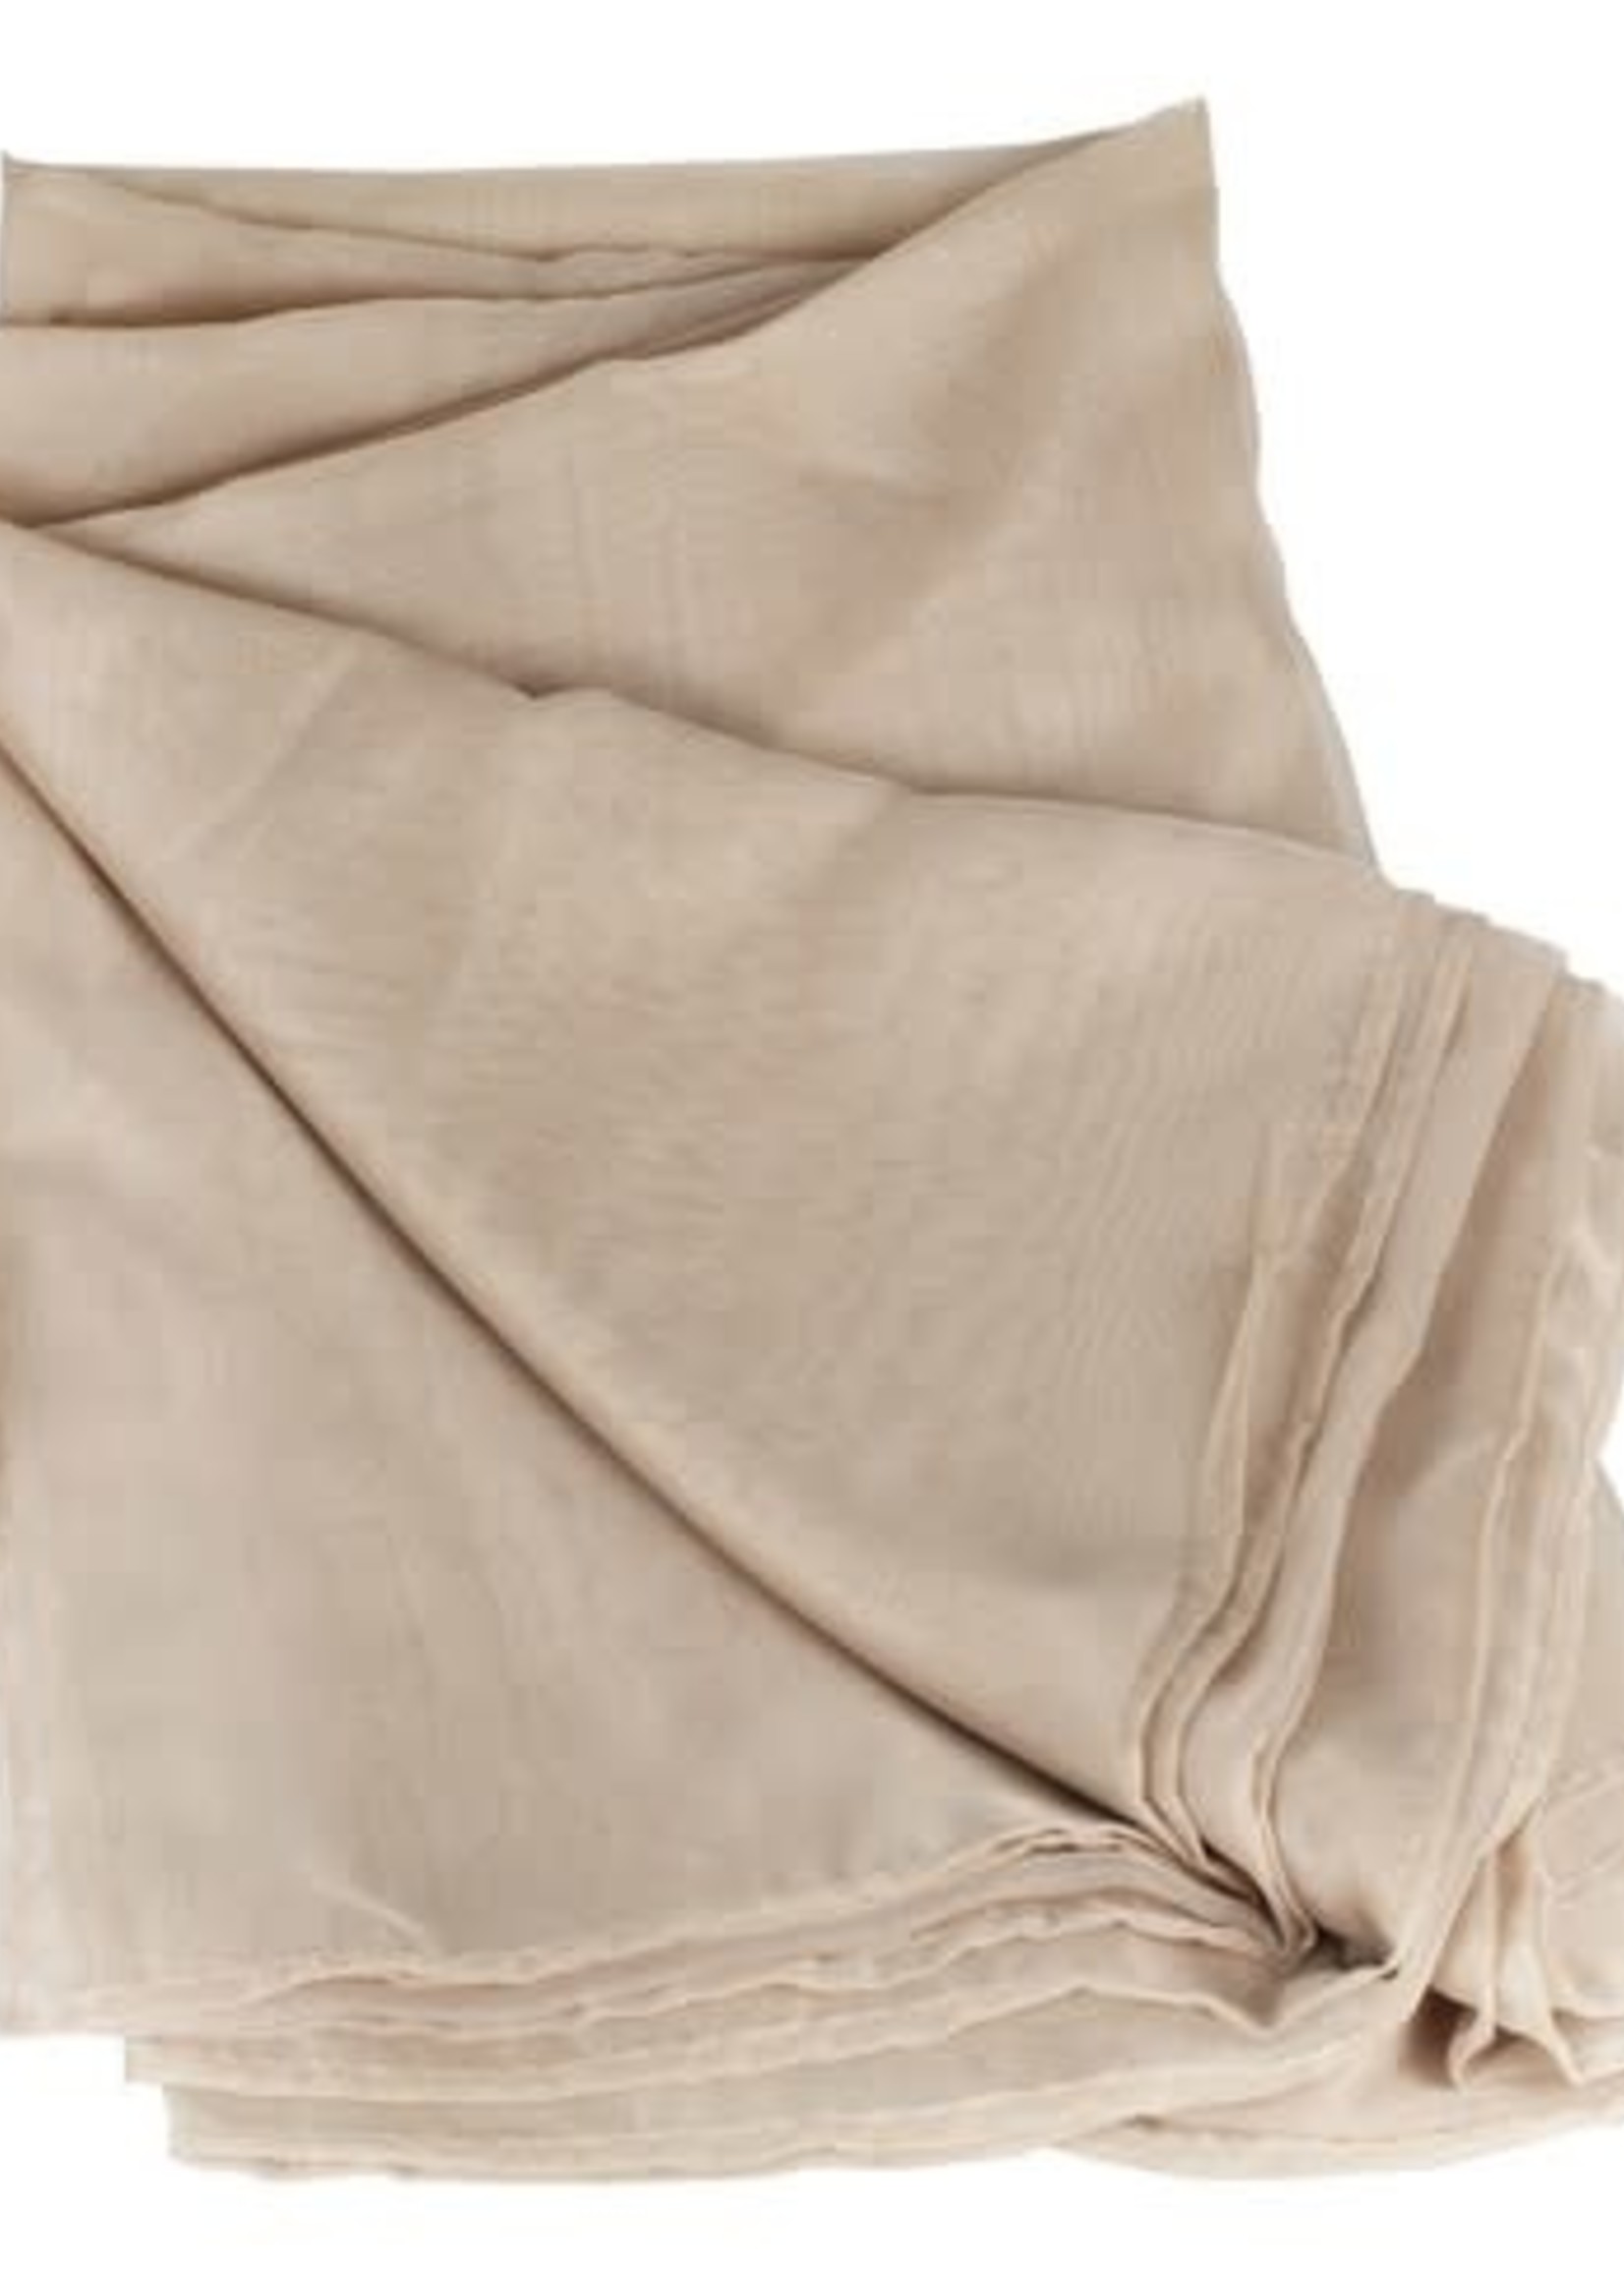 Ginger Ray Taupe Draping Fabric Wedding Backdrop 2.5 x 6M